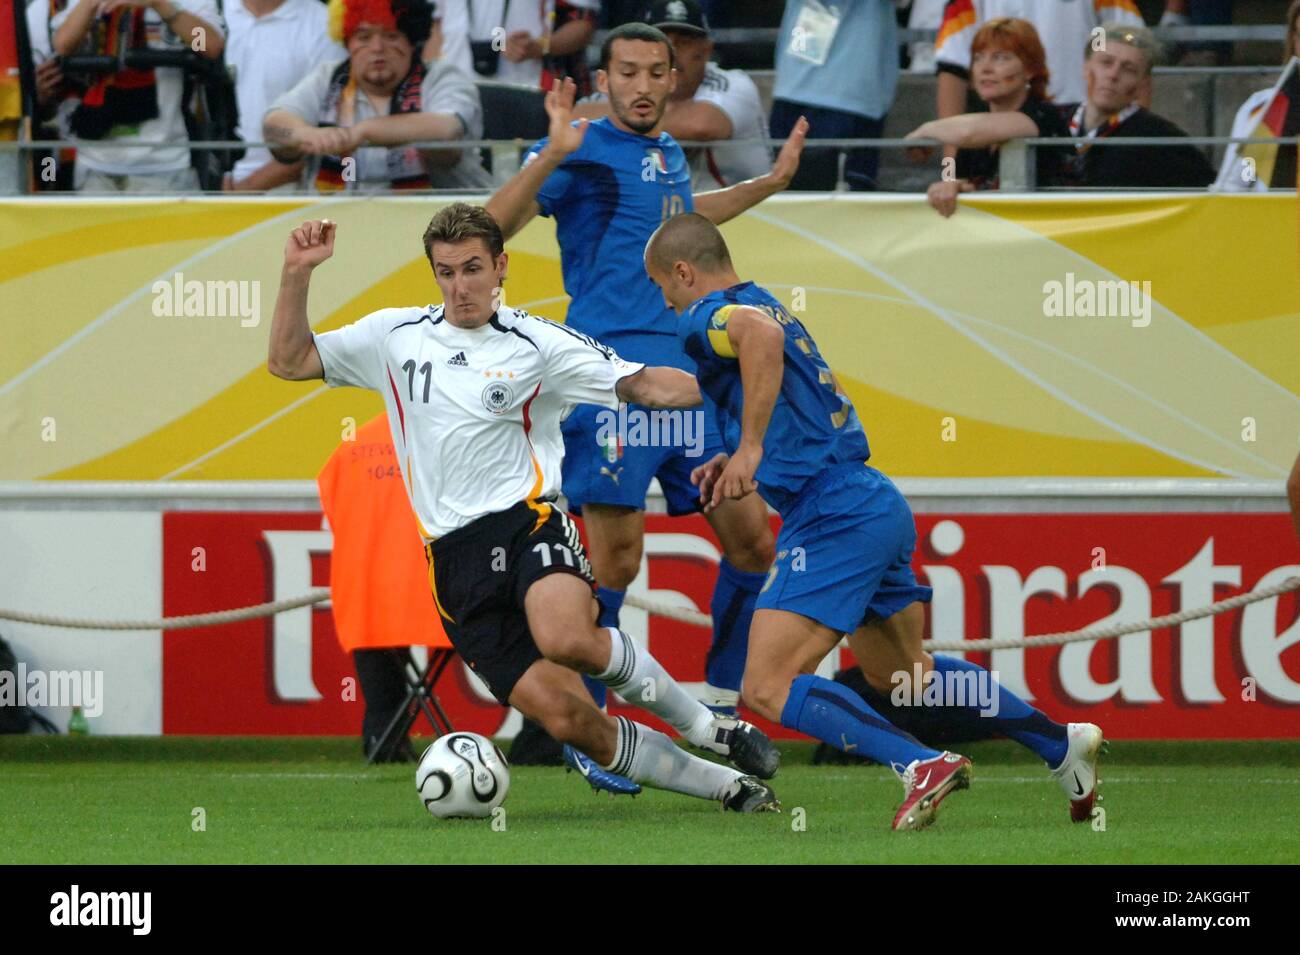 Dortmund Germany, 4 July 2006, FIFA World Cup Germany 2006, Germany-Italy semi-final at the Westfalenstadion: Miroslav Klose and Fabio Cannavaro in action during the  match Stock Photo